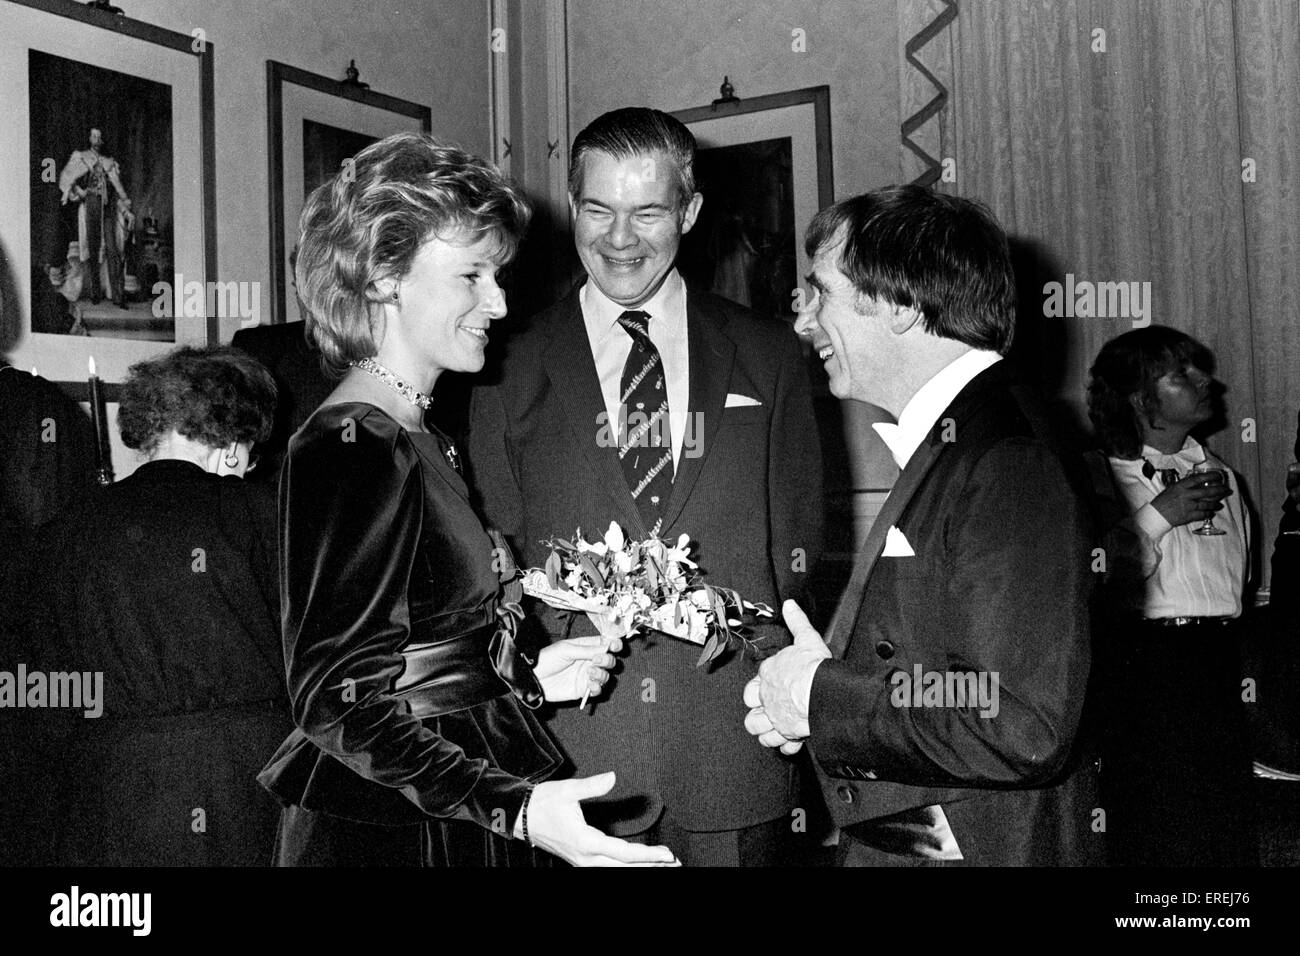 Antony Hopkins CBE, (right) being presented to the Duchess of Gloucester at the Royal Albert Hall, London, 1984. Wearing a Union Jack hat. AH: English composer, conductor, pianist and radio broadcaster, b. 21 March 1922 Stock Photo